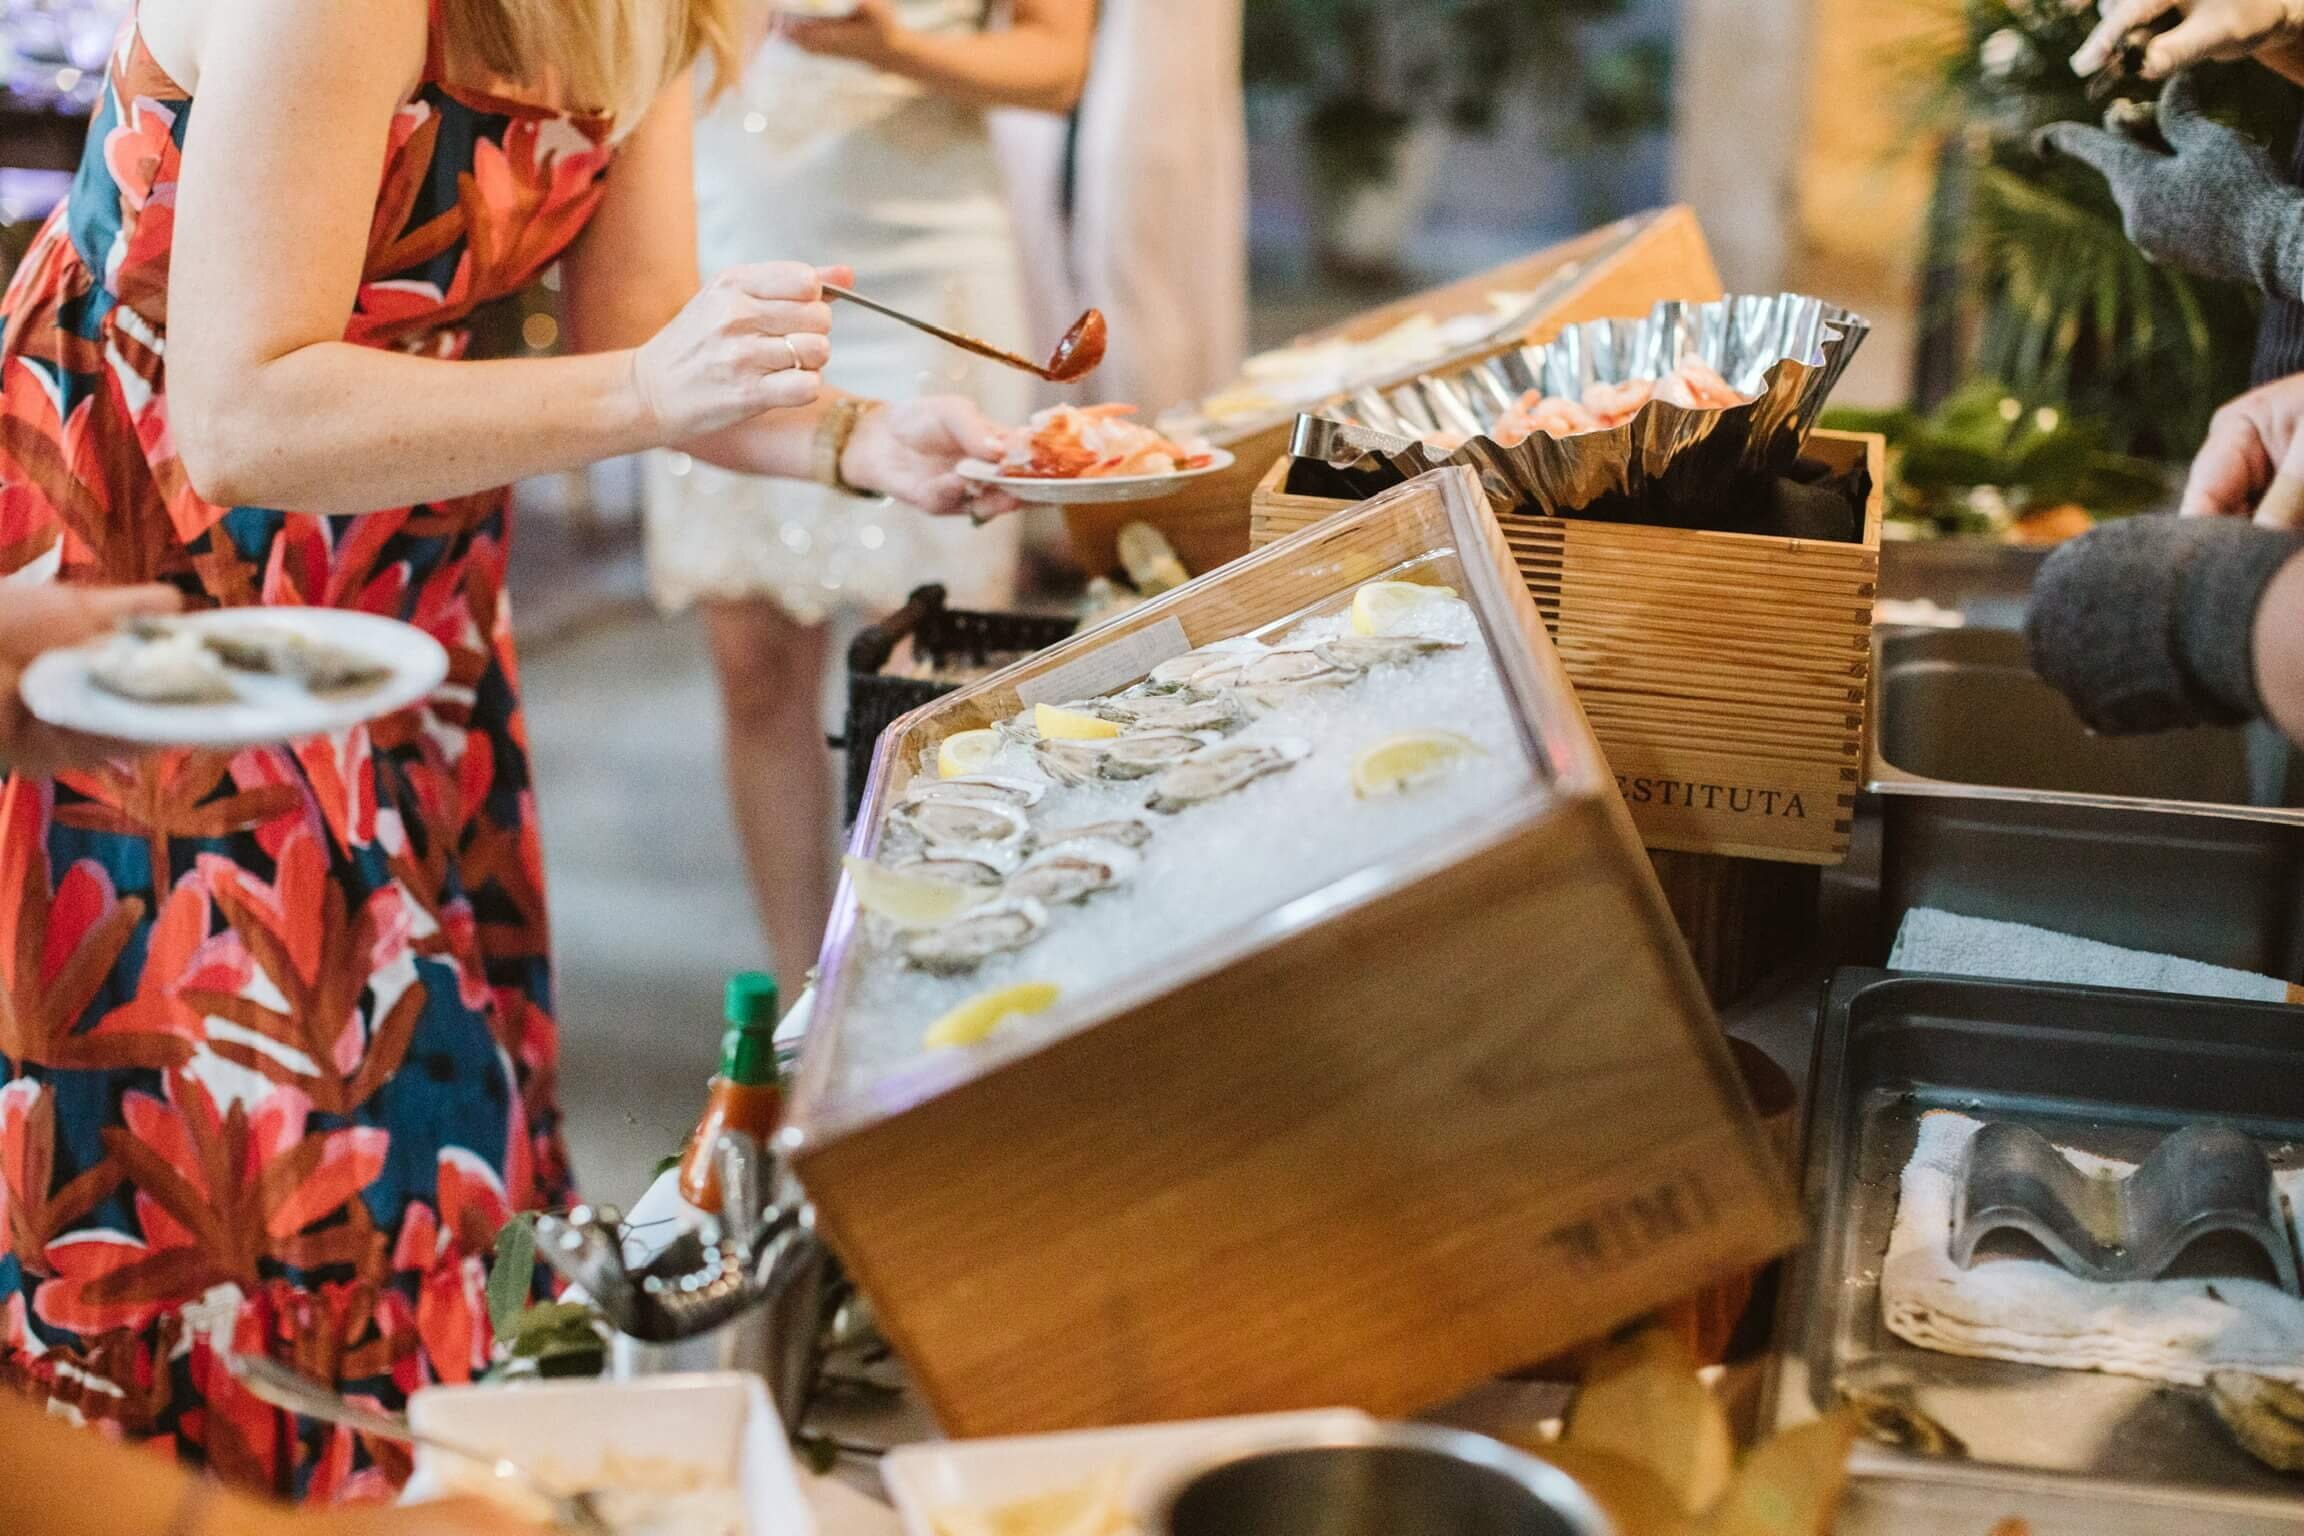 Wedding guest serves herself cocktail sauce over shrimp next to oysters on ice